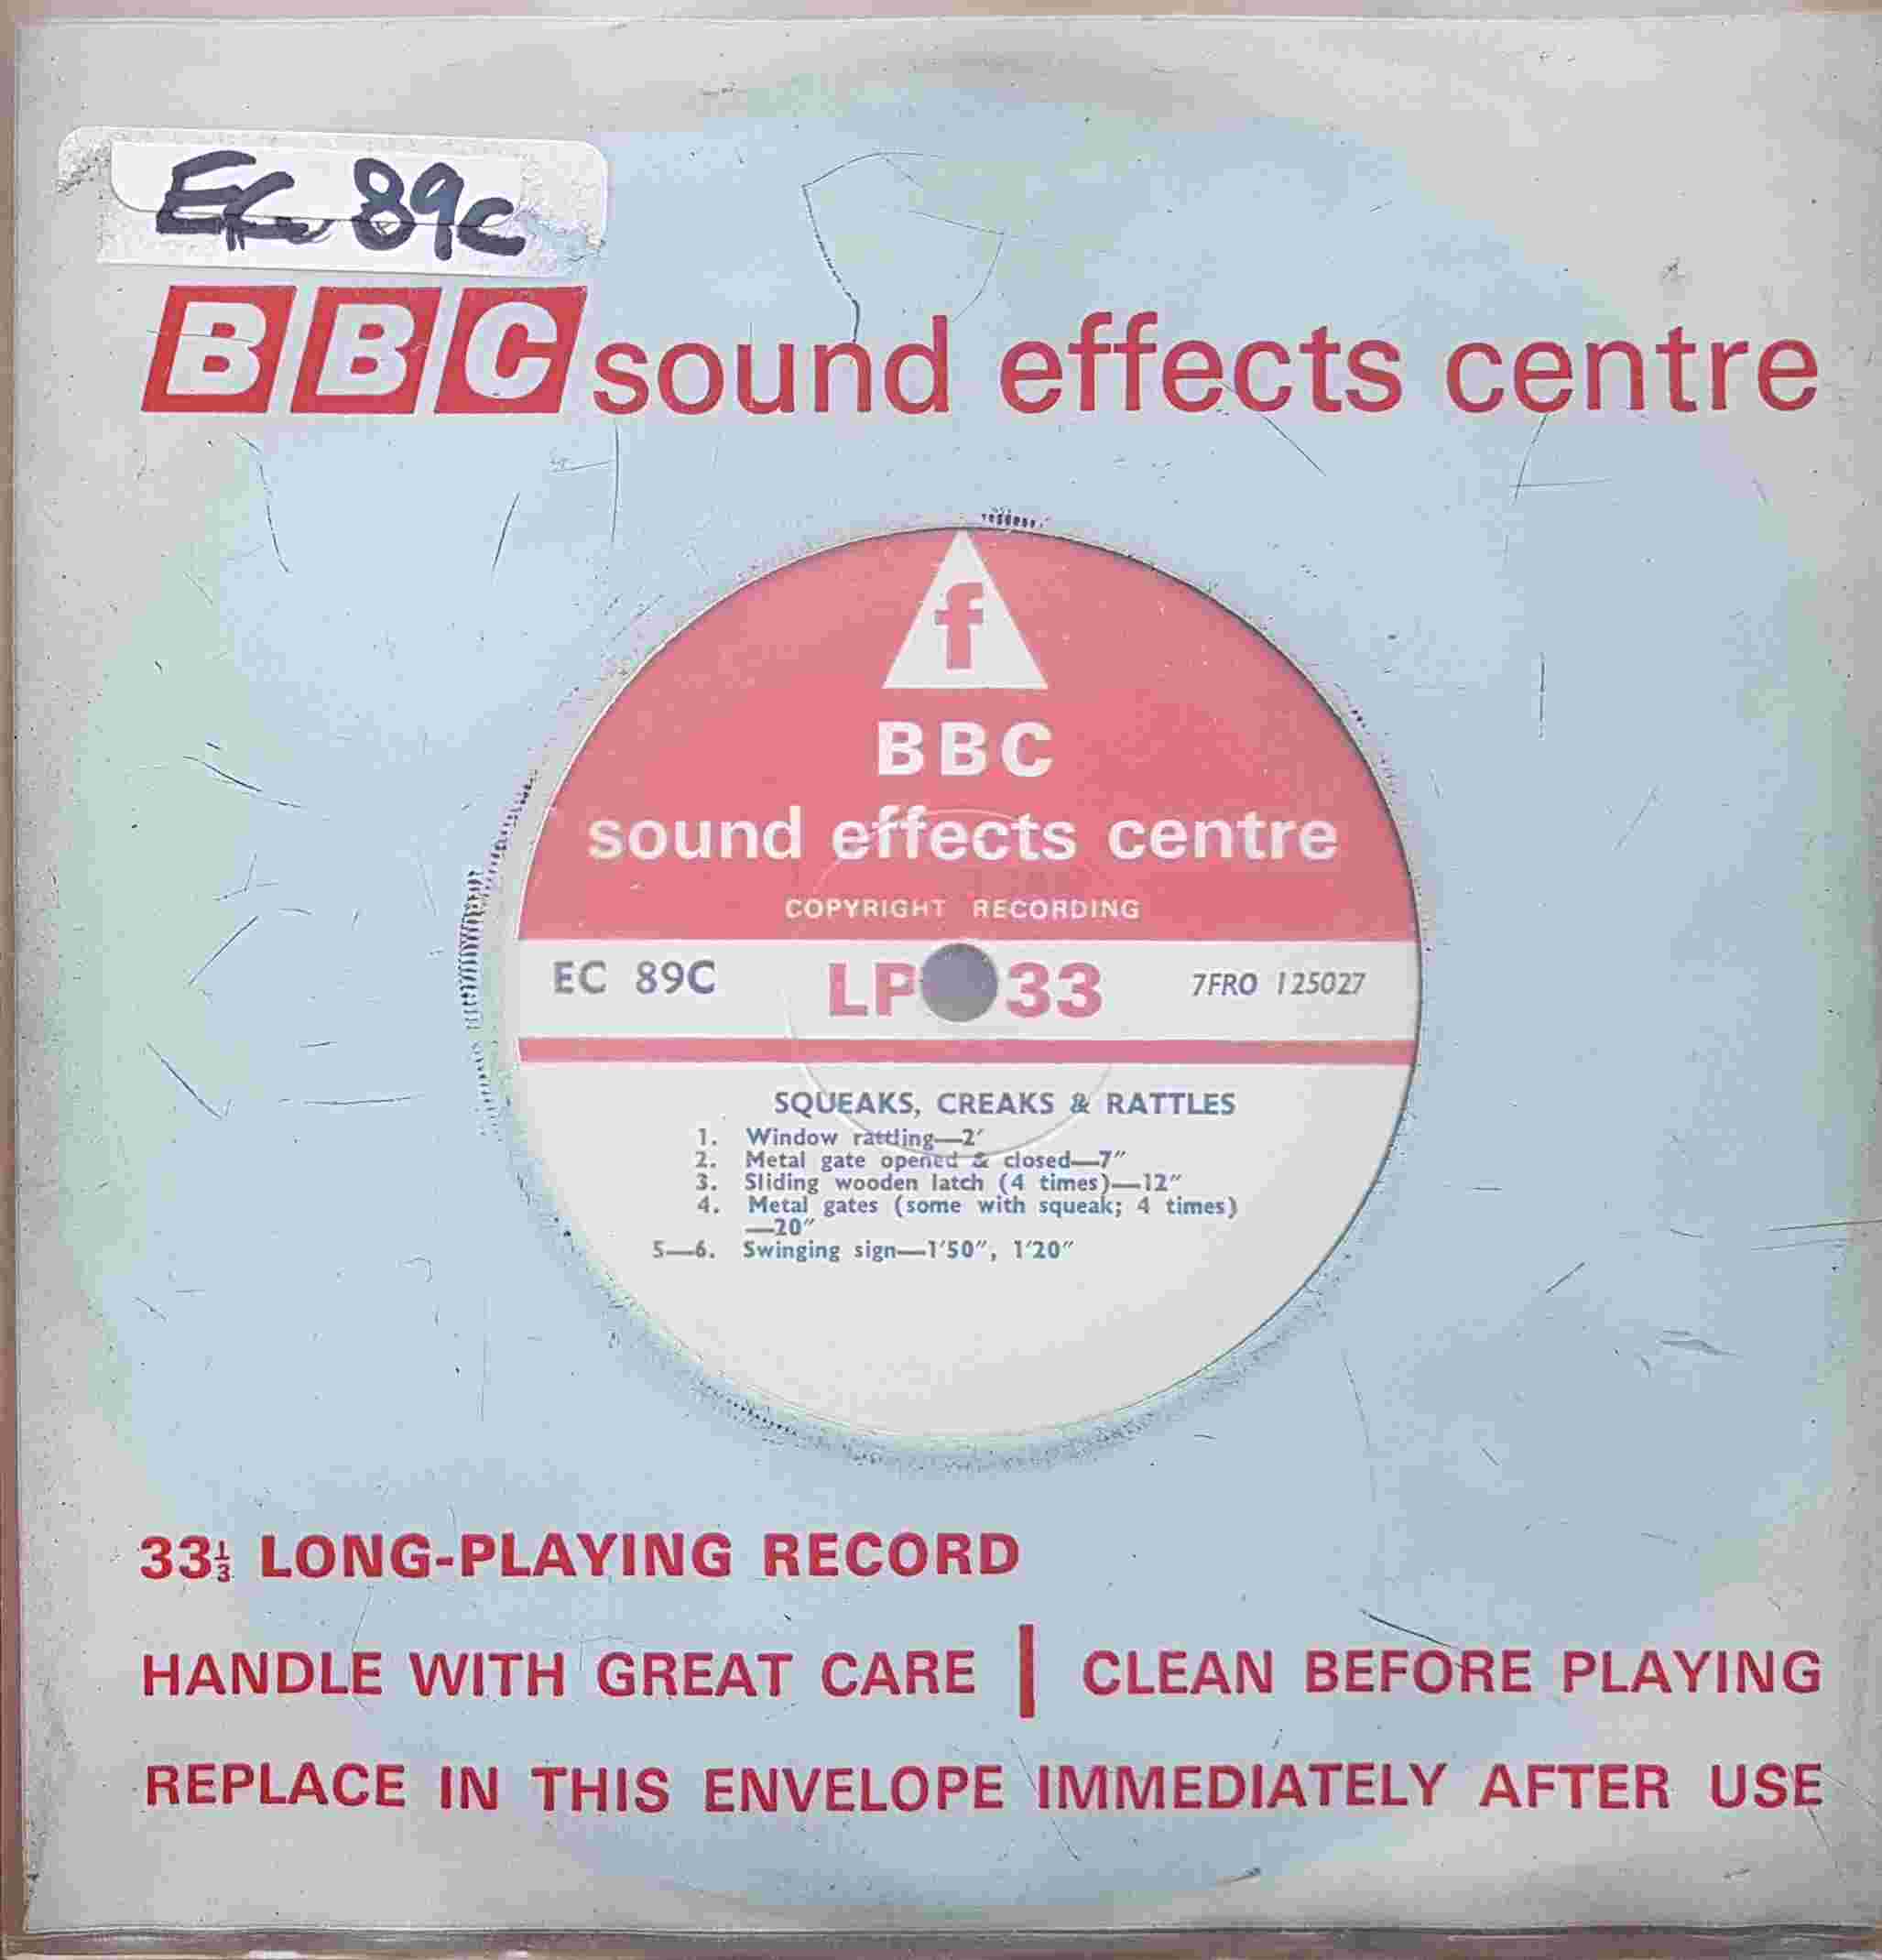 Picture of EC 89C Squeaks, creaks & rattles by artist Not registered from the BBC singles - Records and Tapes library